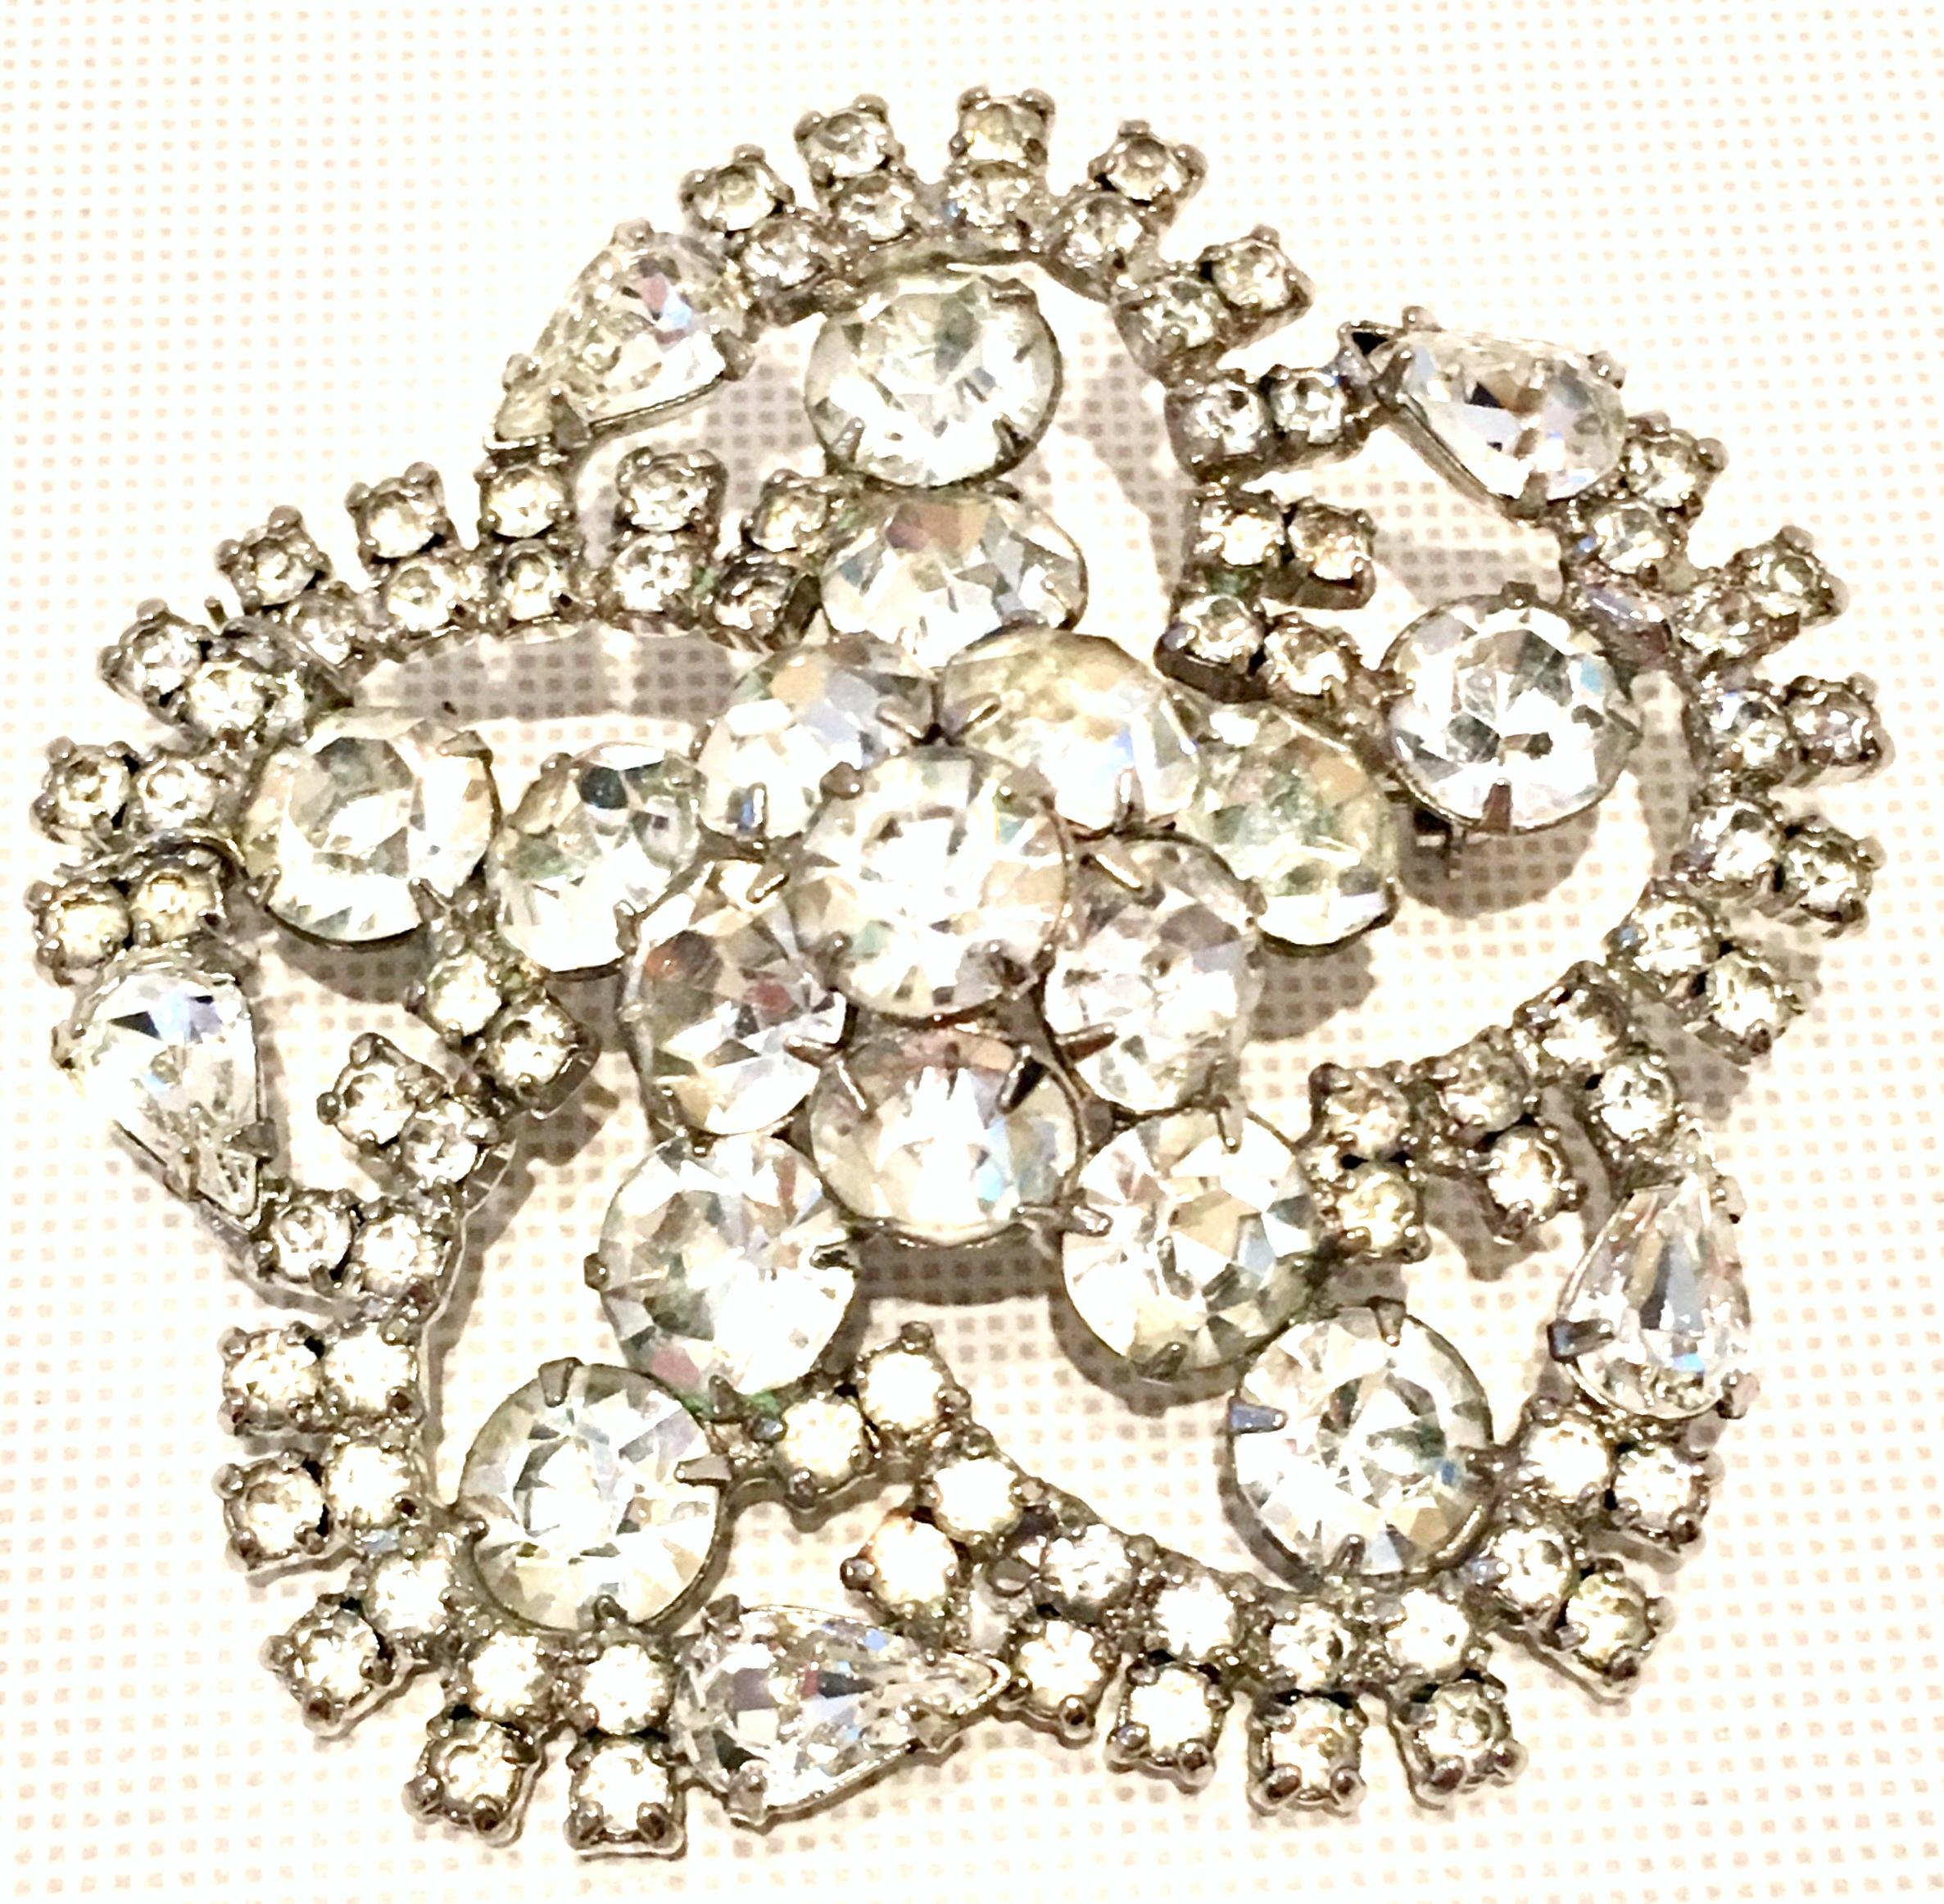 20th Century Silver  & Austrian Crystal Clear Rhinestone Brooch. This large dimensional and brilliant brooch features, silver chromium plate metal with prong set crystal rhinestones. The stones are round and pear shaped. The brooch has a dimensional